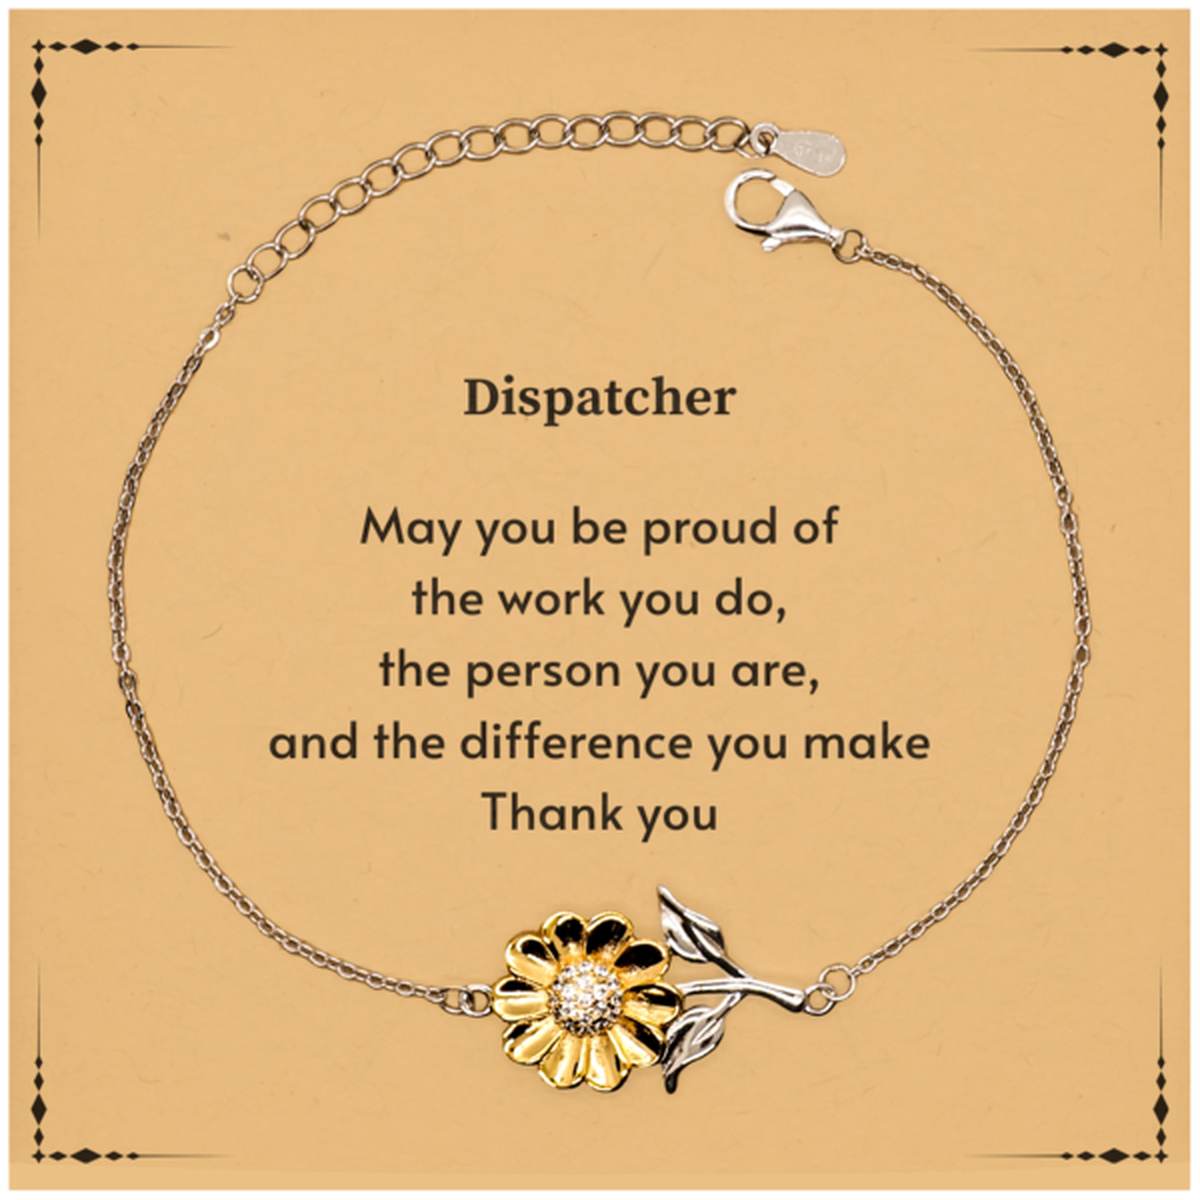 Heartwarming Sunflower Bracelet Retirement Coworkers Gifts for Dispatcher, Dispatcher May You be proud of the work you do, the person you are Gifts for Boss Men Women Friends